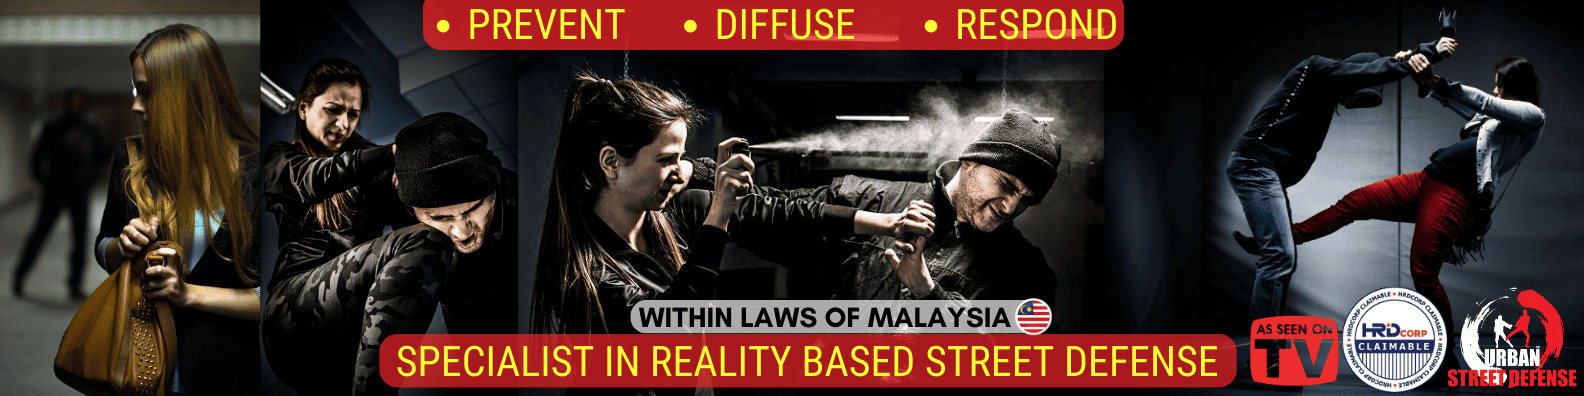 Self-Defense in Reality